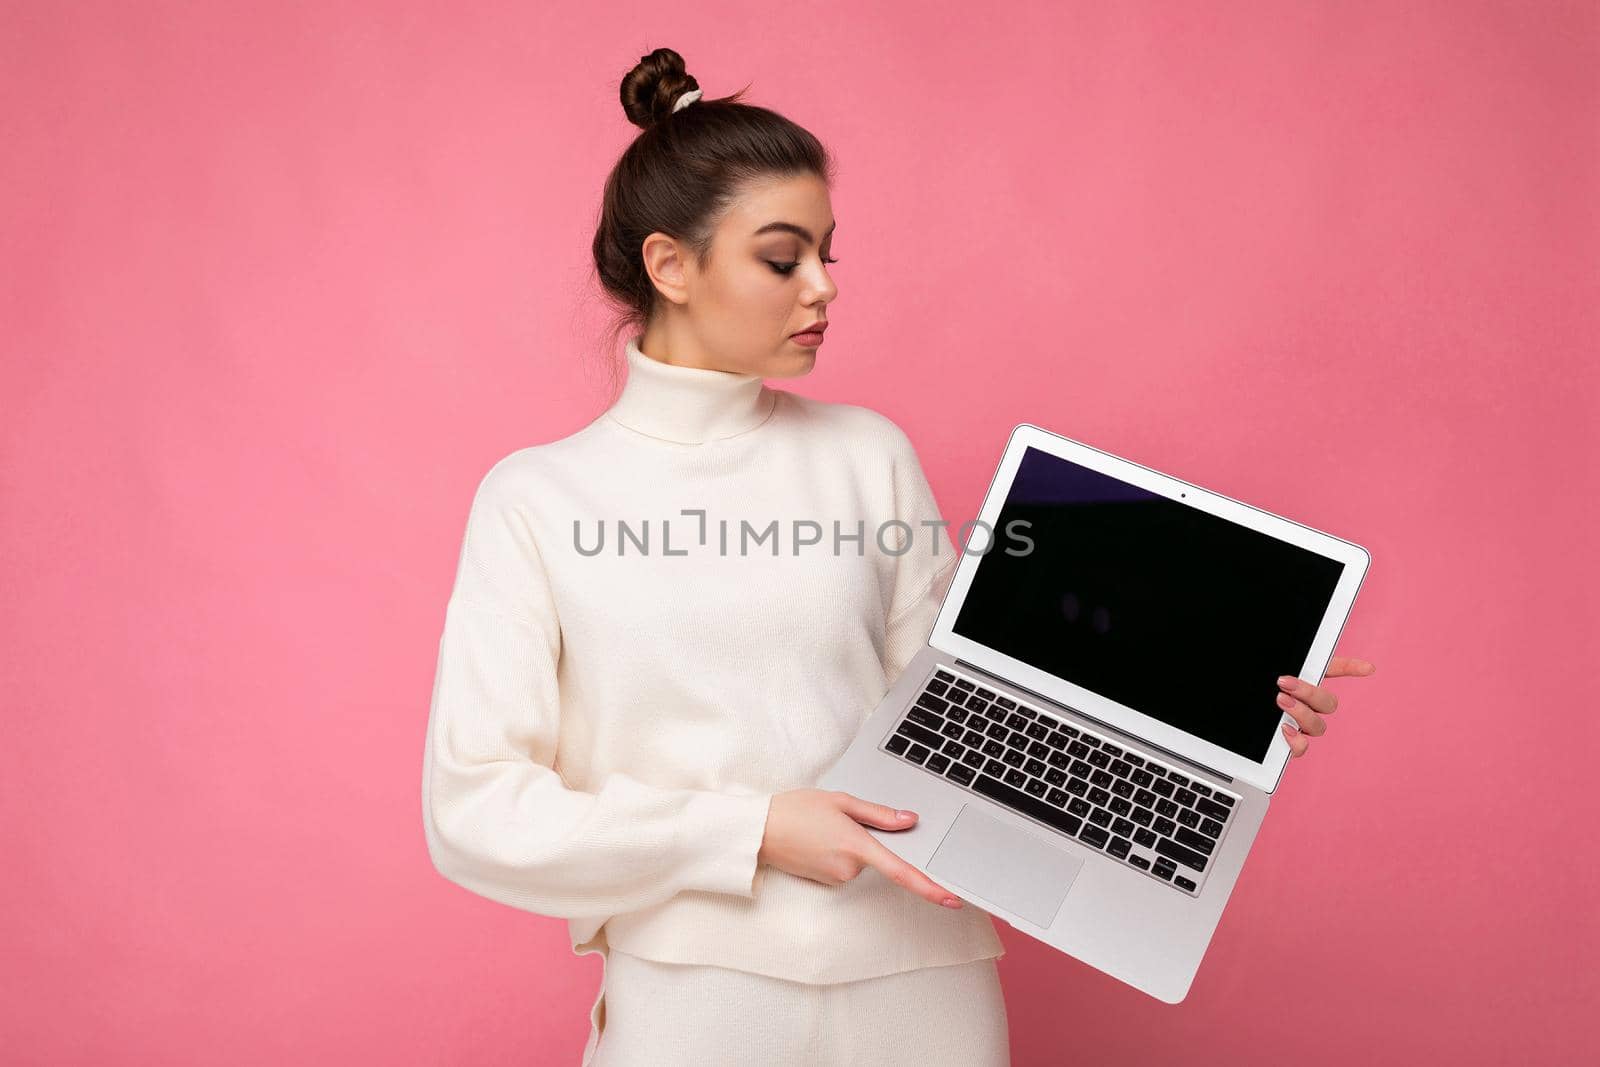 Photo of beautiful woman with gathered brunette hair wearing white sweater holding computer laptop and looking at the netbook isolated over pink wall background.